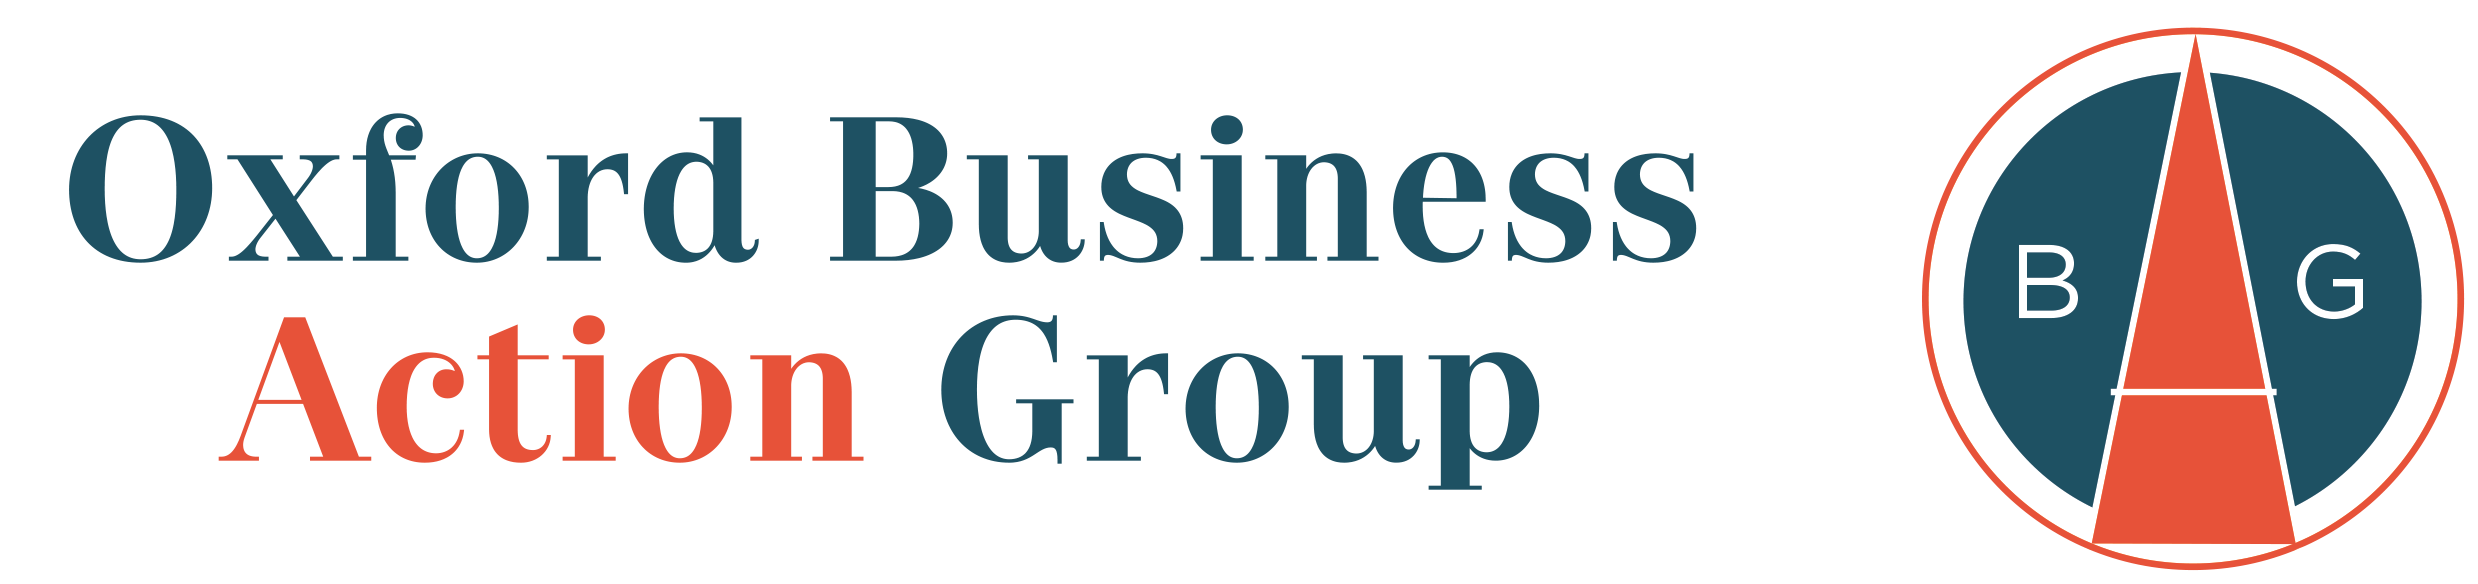 Oxford Business Action Group